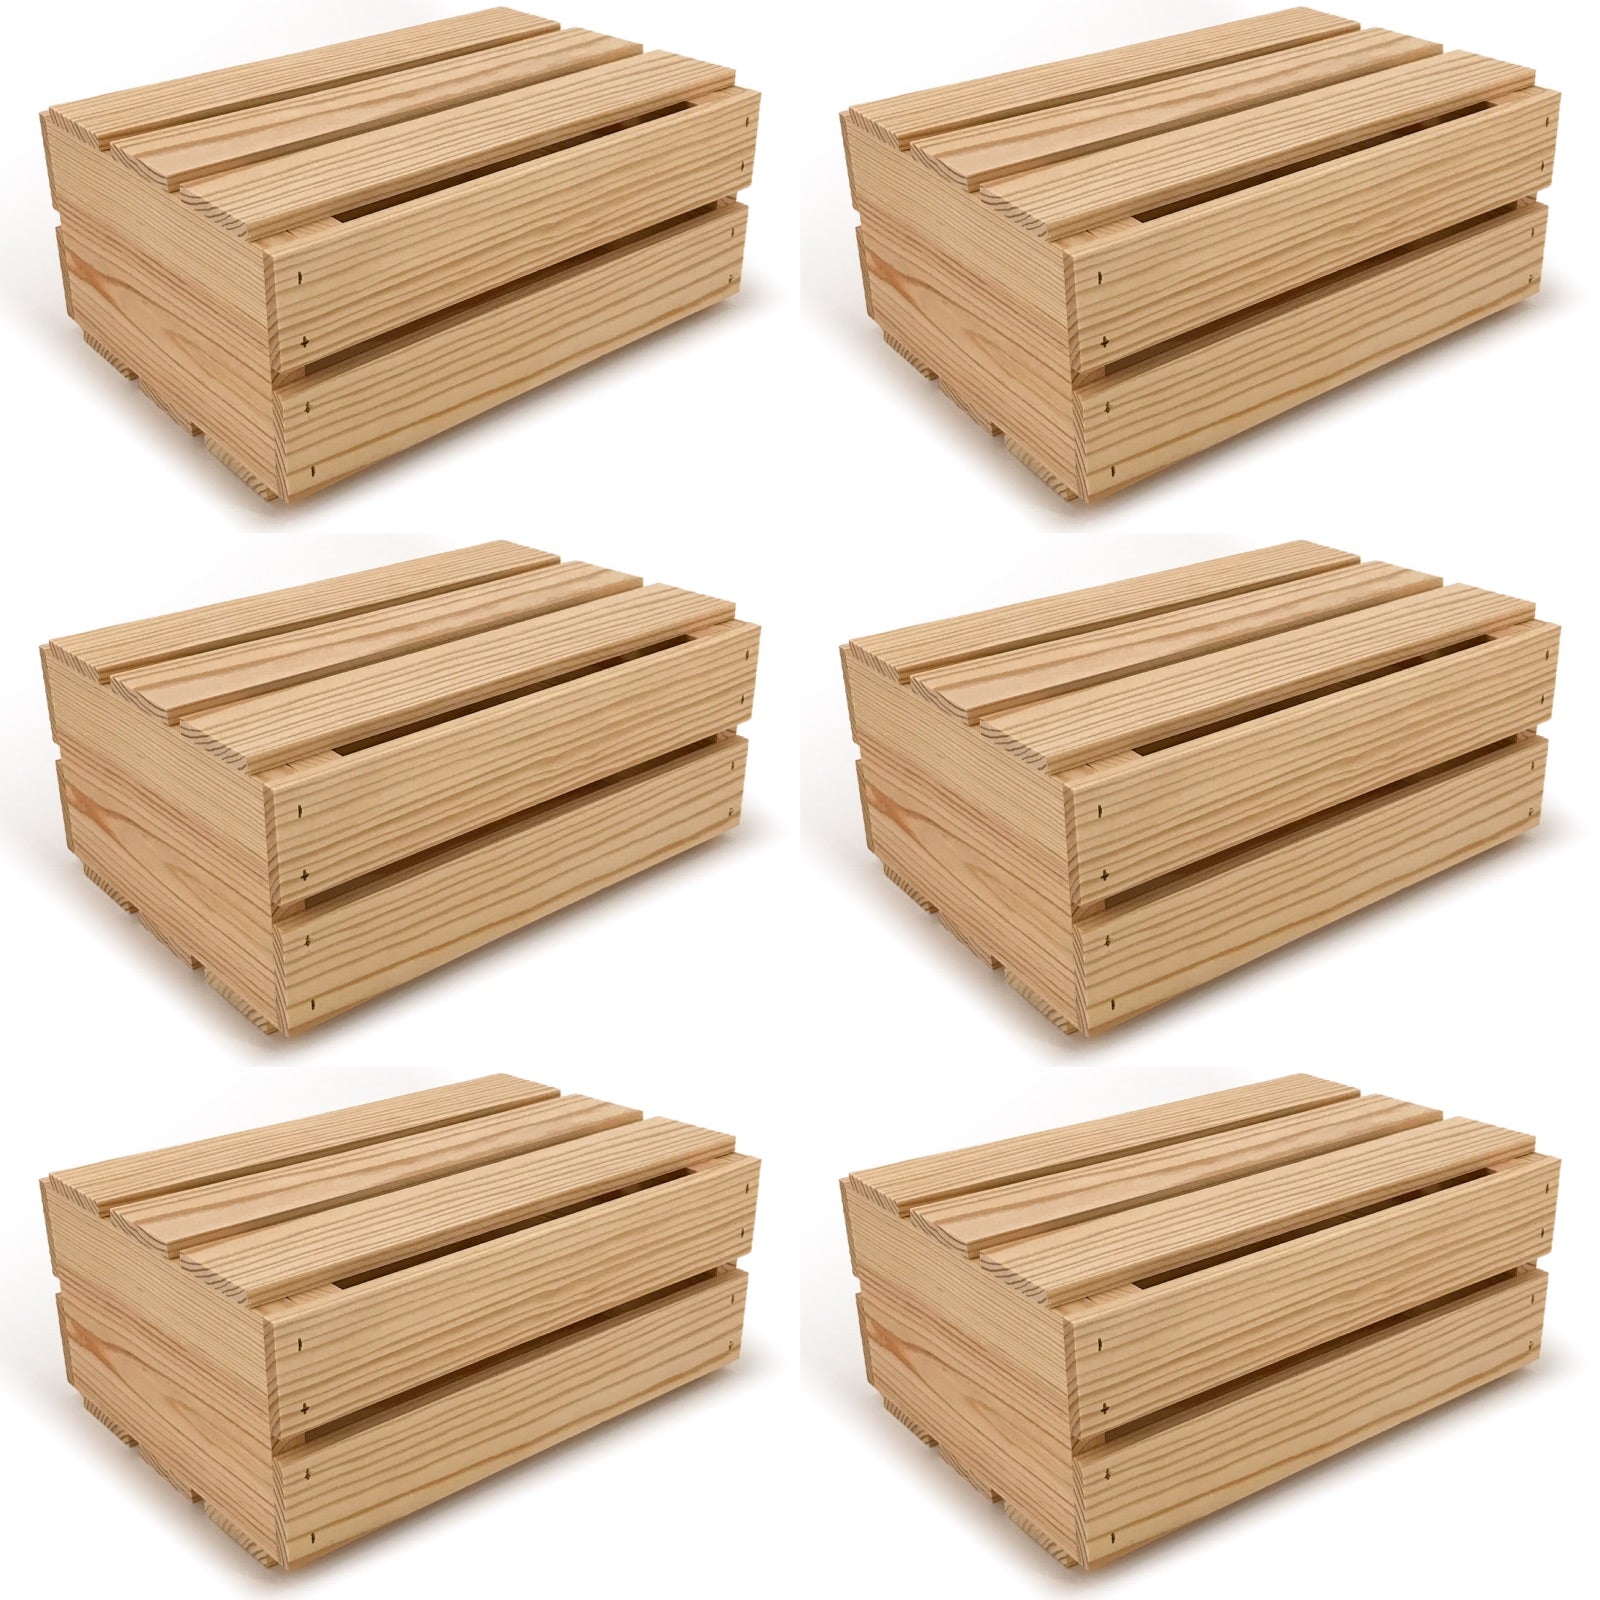 6 Small wooden crates with lid 12x9x5.25, 6-WS-12-9-5.25-NX-NW-LL, 12-WS-12-9-5.25-NX-NW-LL, 24-WS-12-9-5.25-NX-NW-LL, 48-WS-12-9-5.25-NX-NW-LL, 96-WS-12-9-5.25-NX-NW-LL